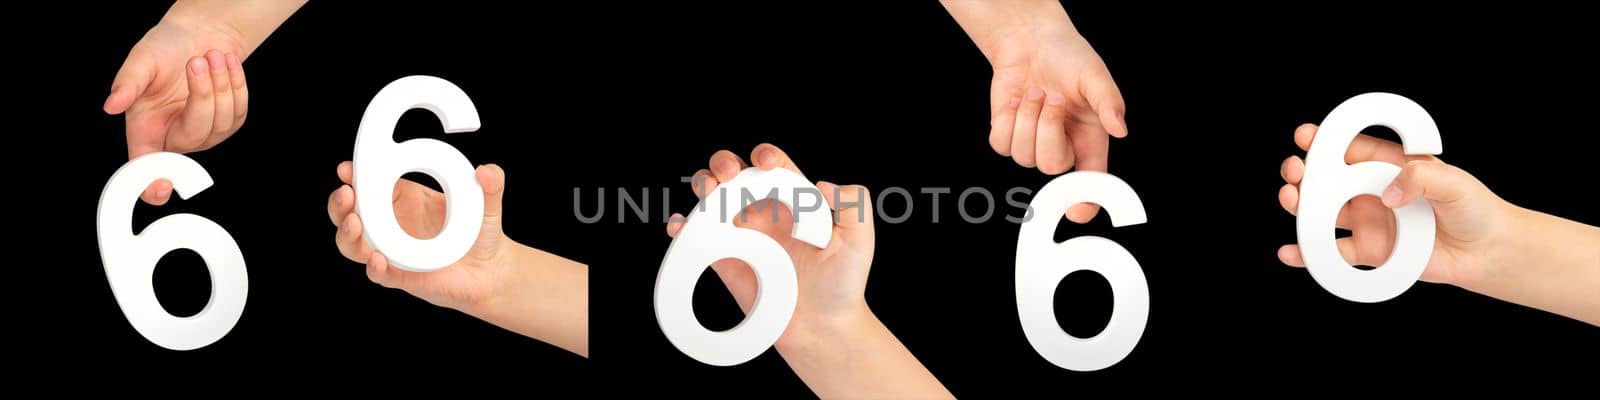 Number six in hand isolated on black background. Number 6 in a child's hand holding on a black background. A large set of hands with the number six, for inserting into a project or design. by SERSOL